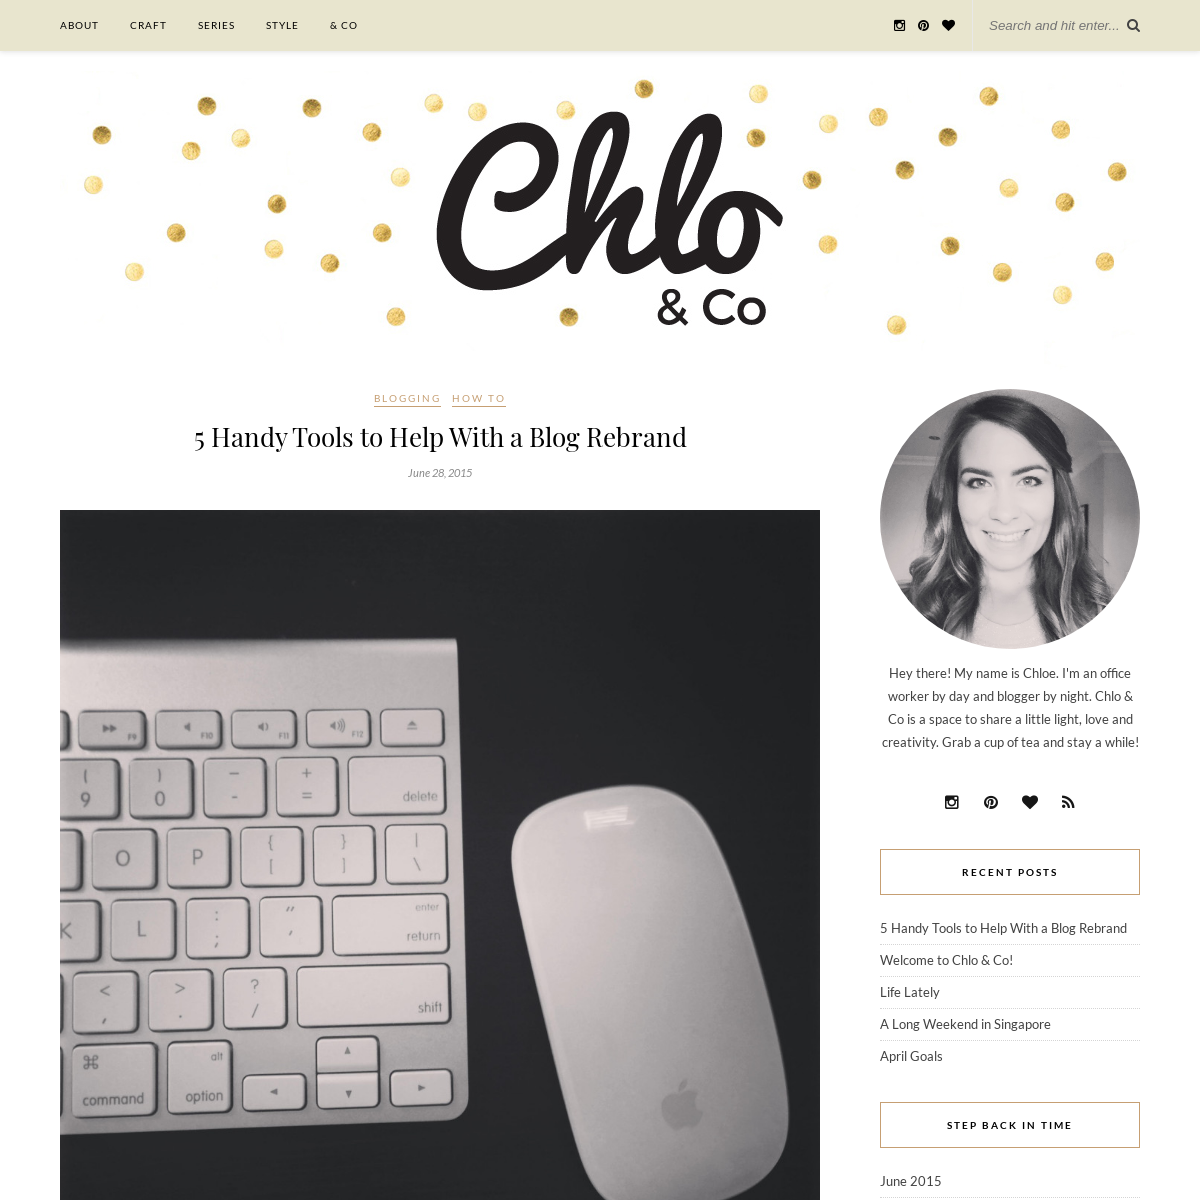 A complete backup of chloandco.com